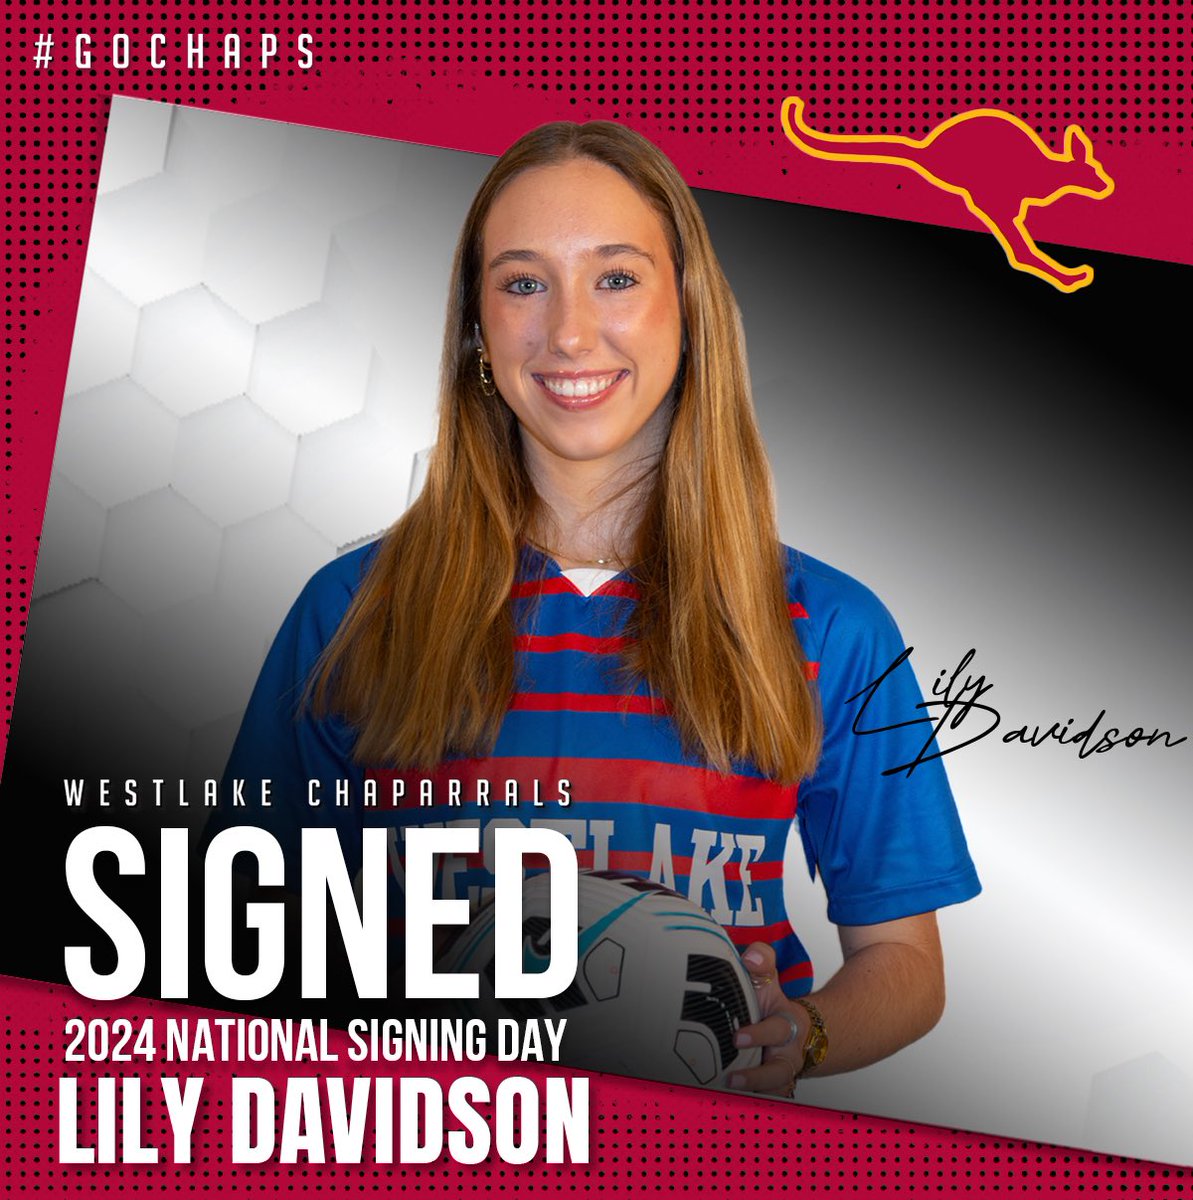 Lily Davidson will head to Sherman, Texas to further her academic and soccer career at Austin College. Congratulations, Lily. #RooNation #GoChaps